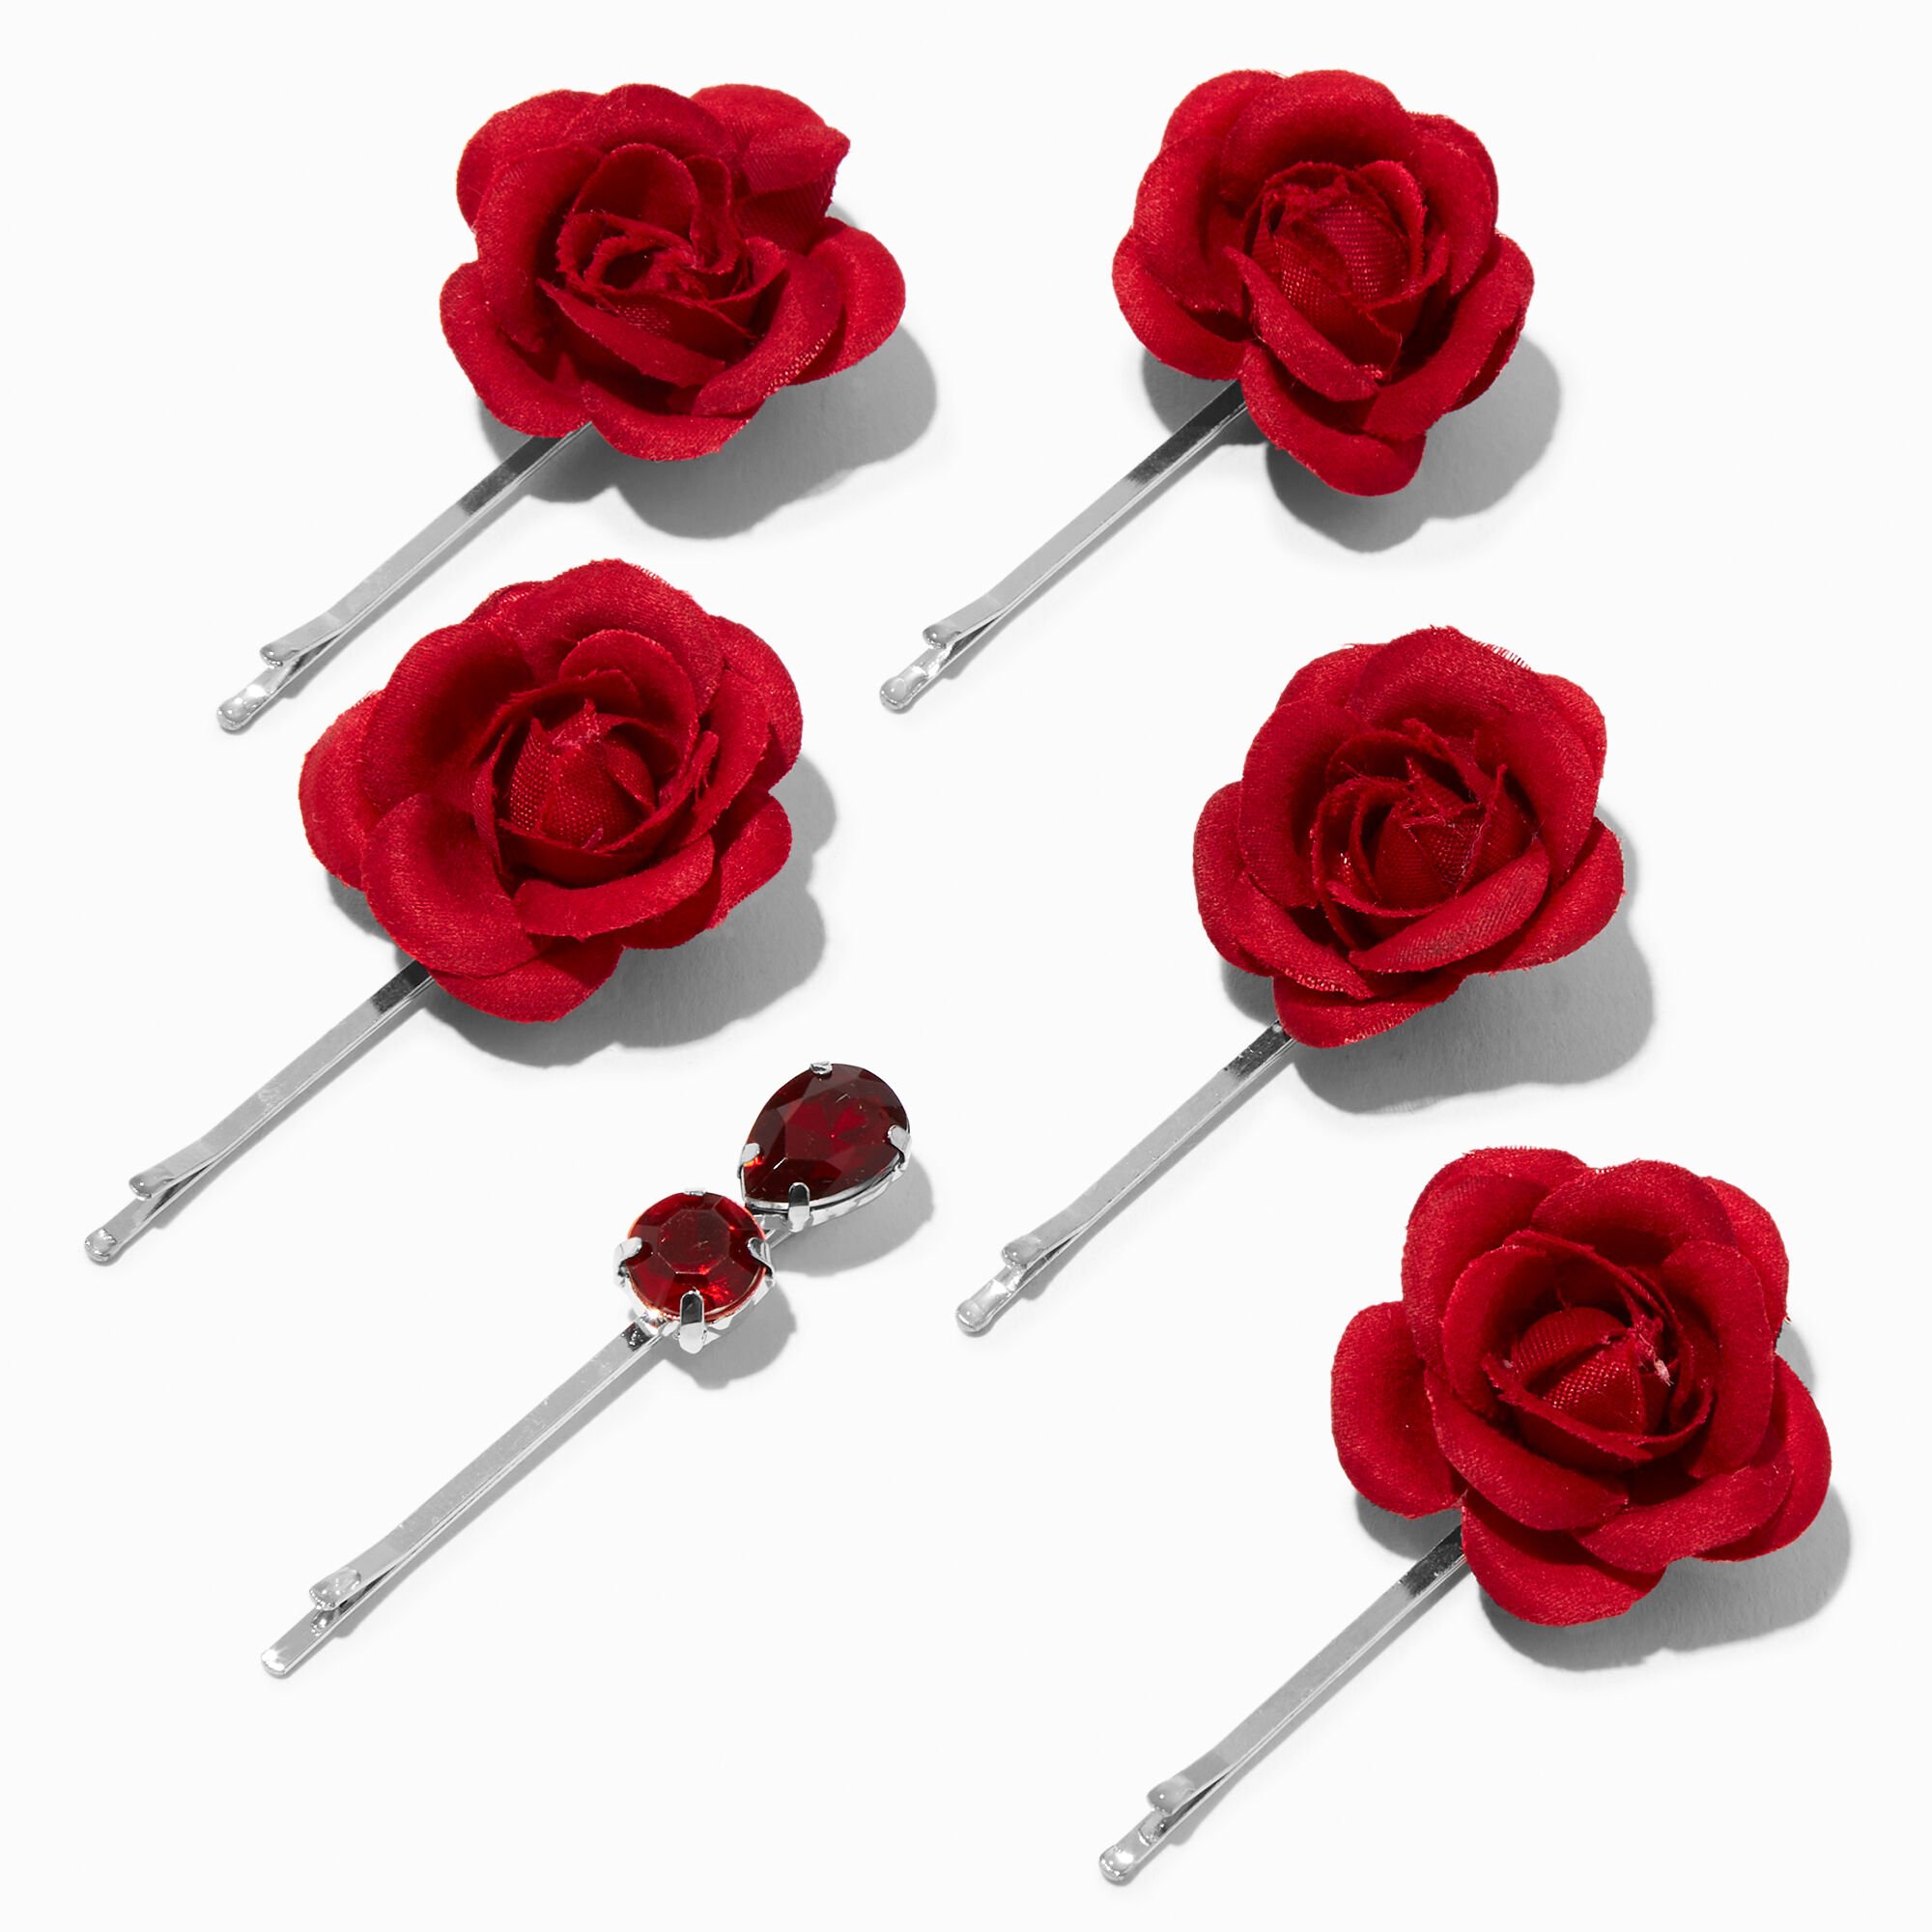 View Claires Rose Gemstone Hair Pins 6 Pack Red information